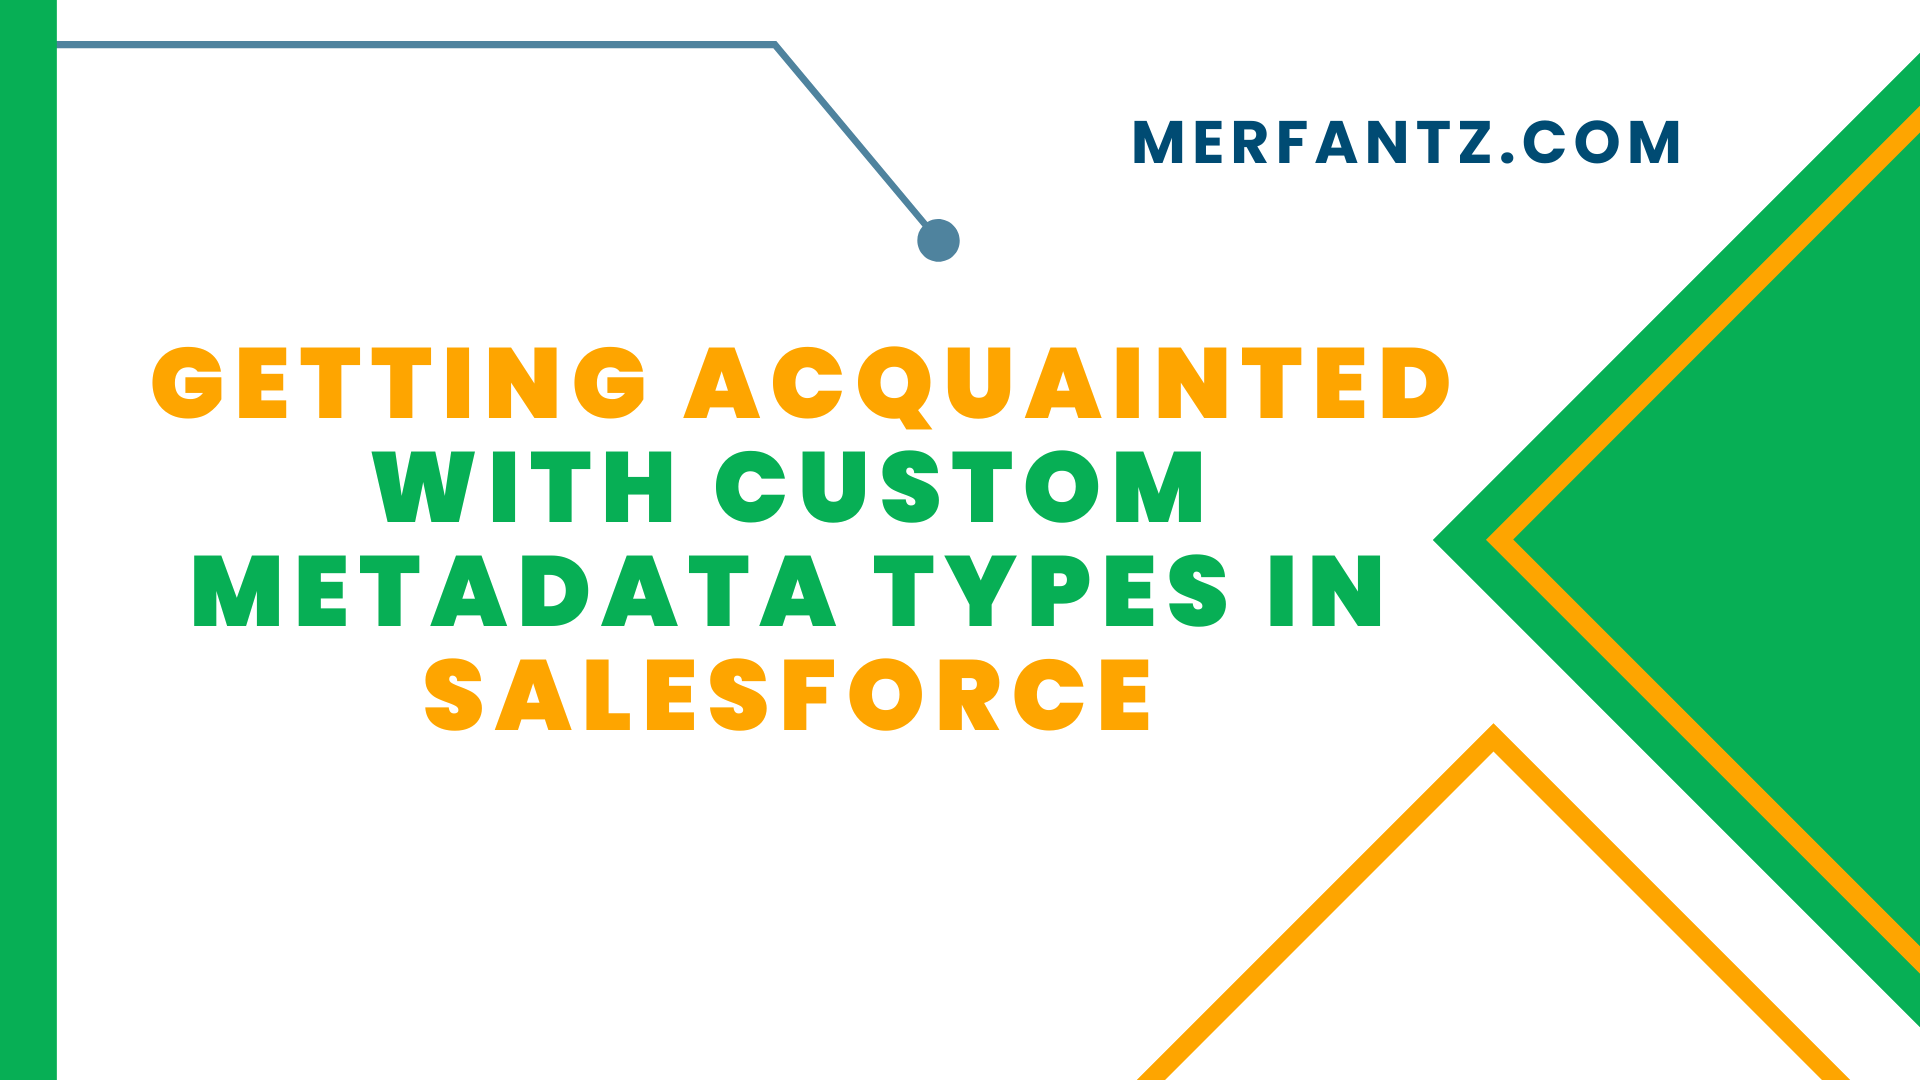 Getting Acquainted with Custom Metadata Types in Salesforce